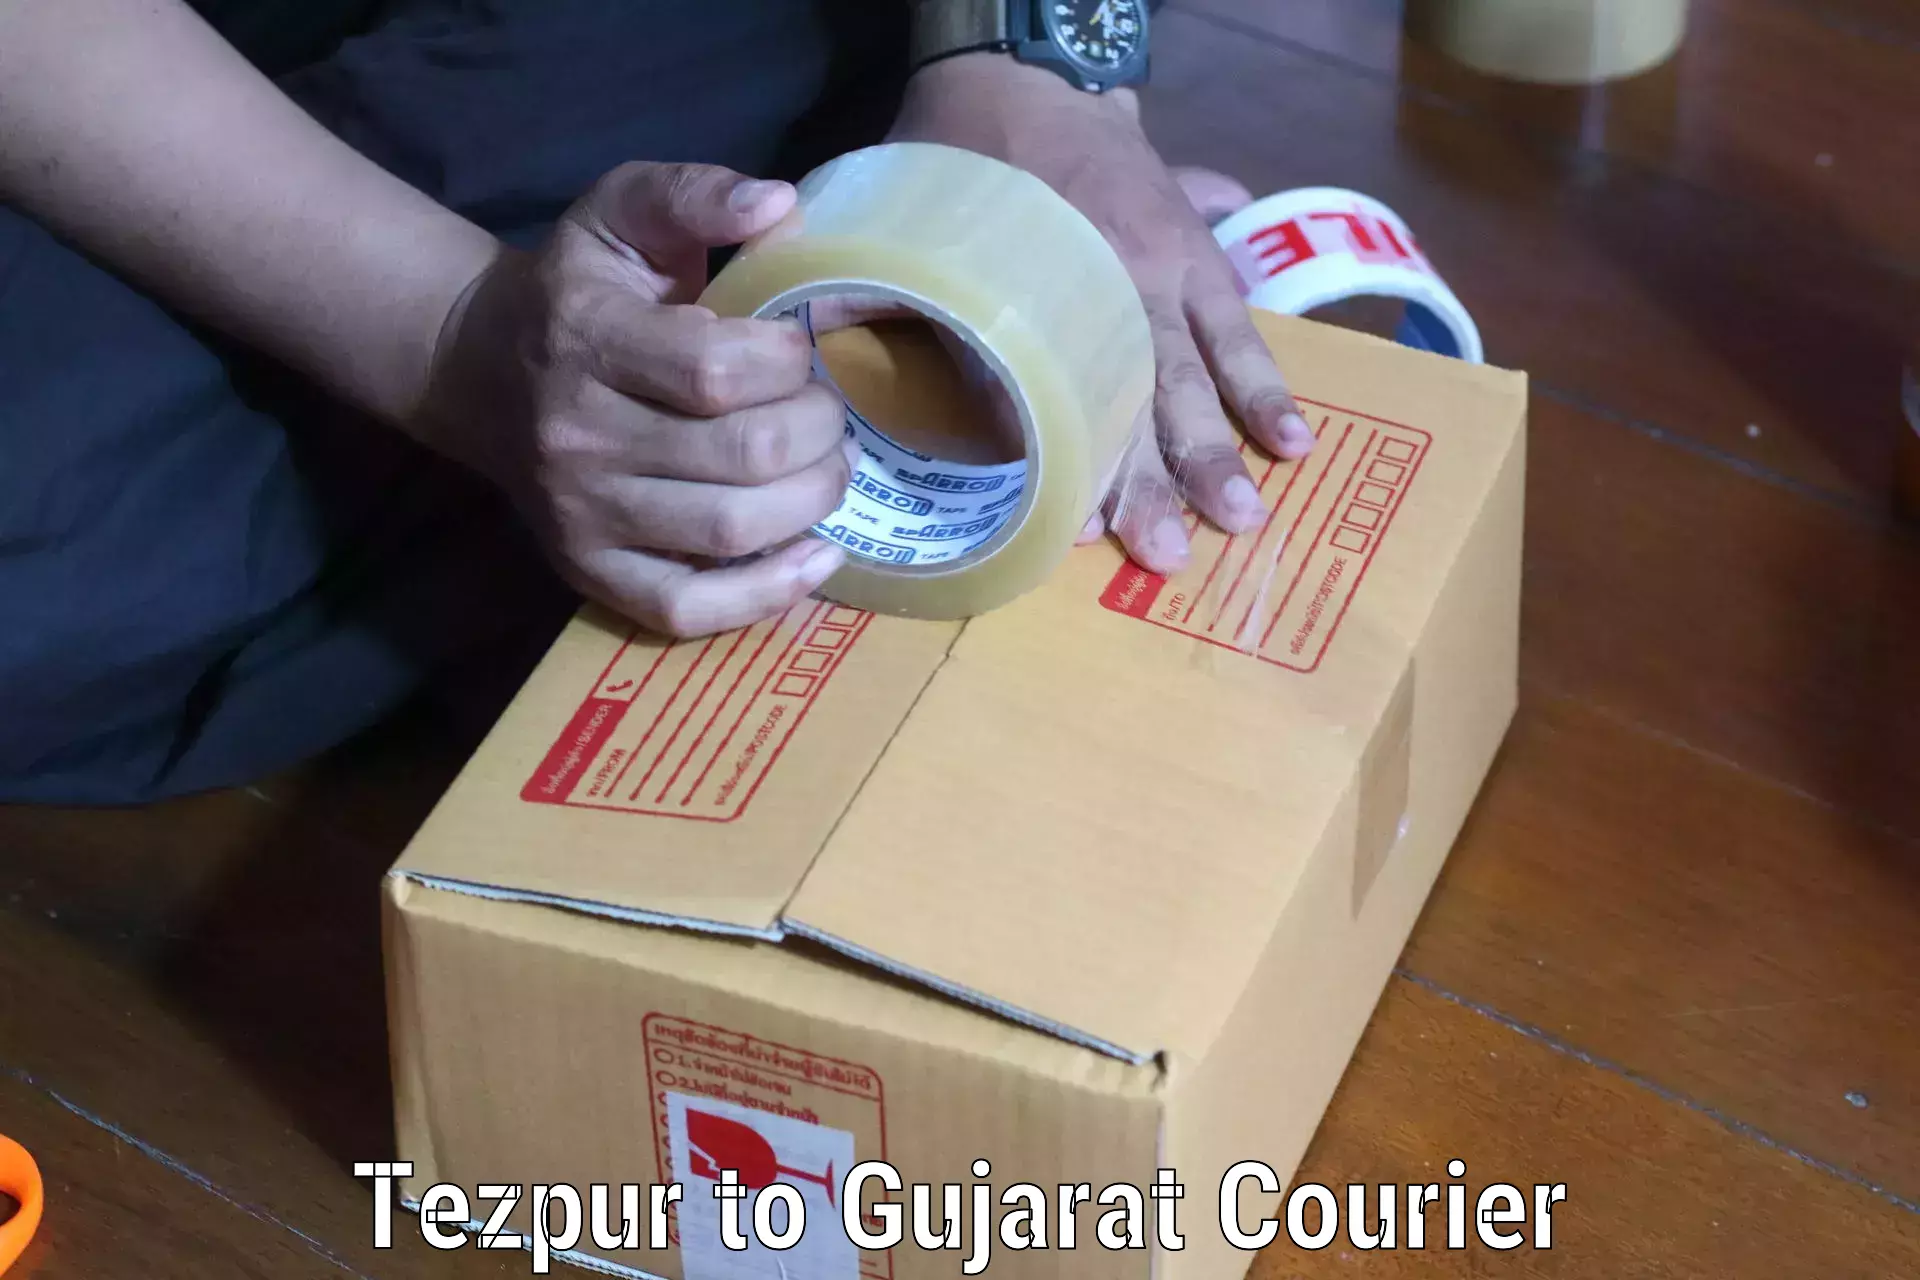 Multi-city courier Tezpur to Ahmedabad